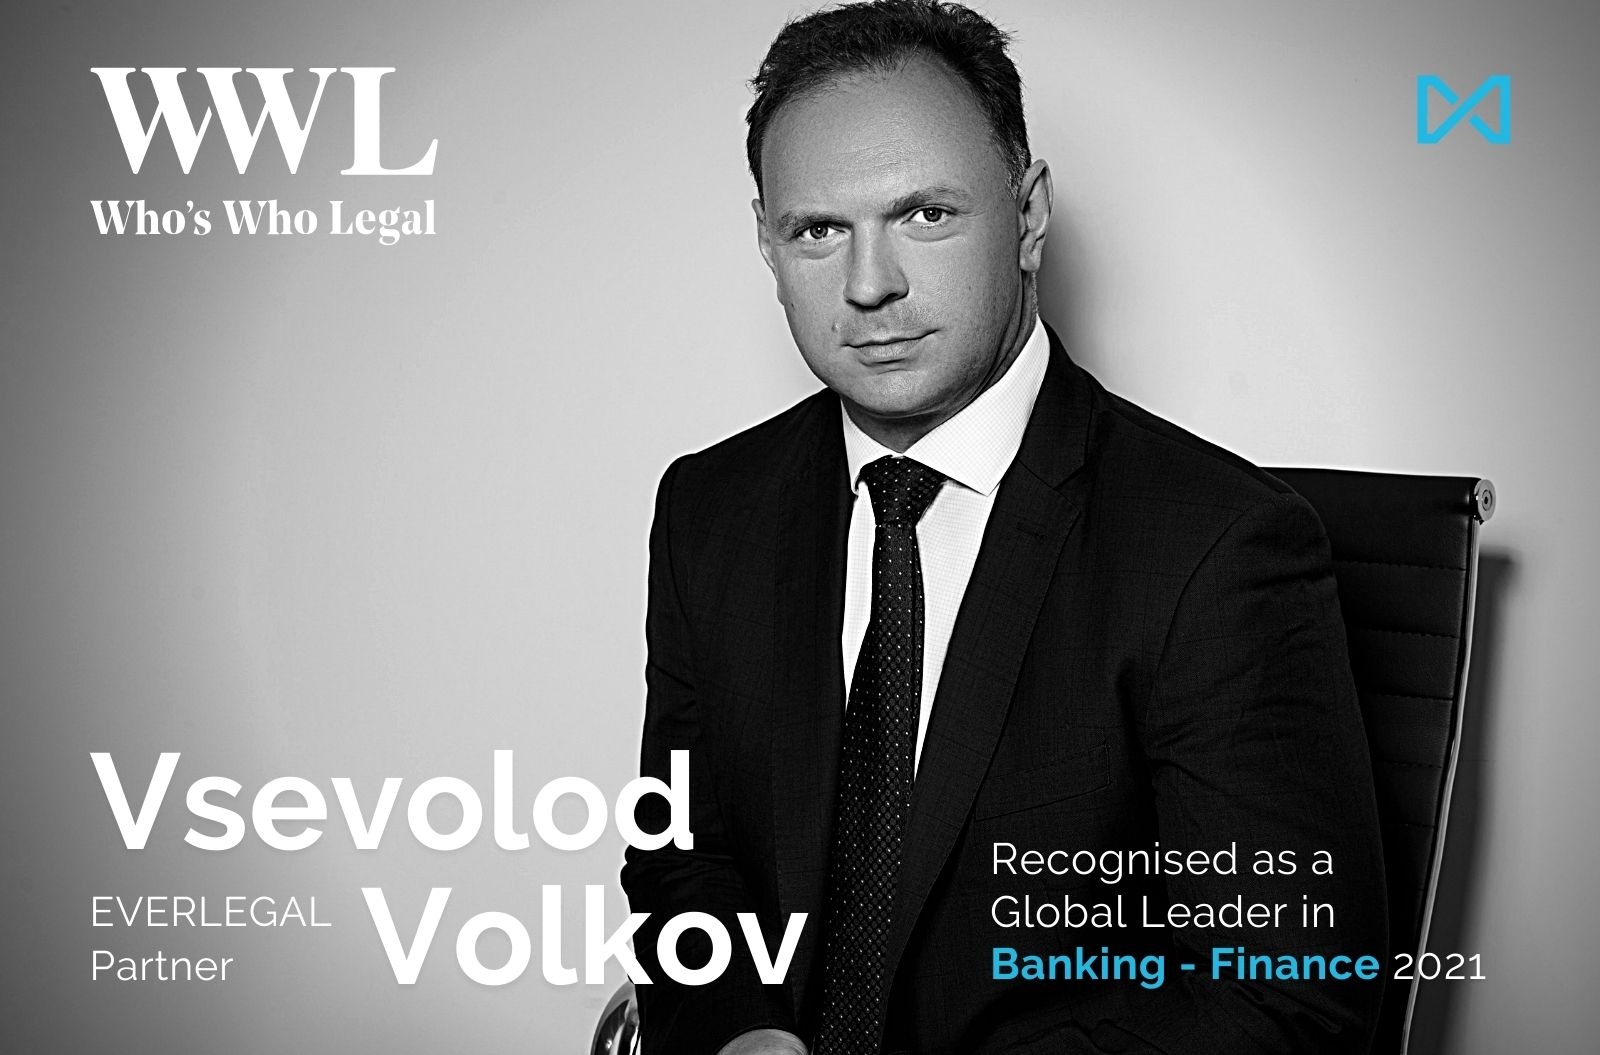 Vsevolod Volkov is recognised as a global leader in WWL: Banking-Finance 